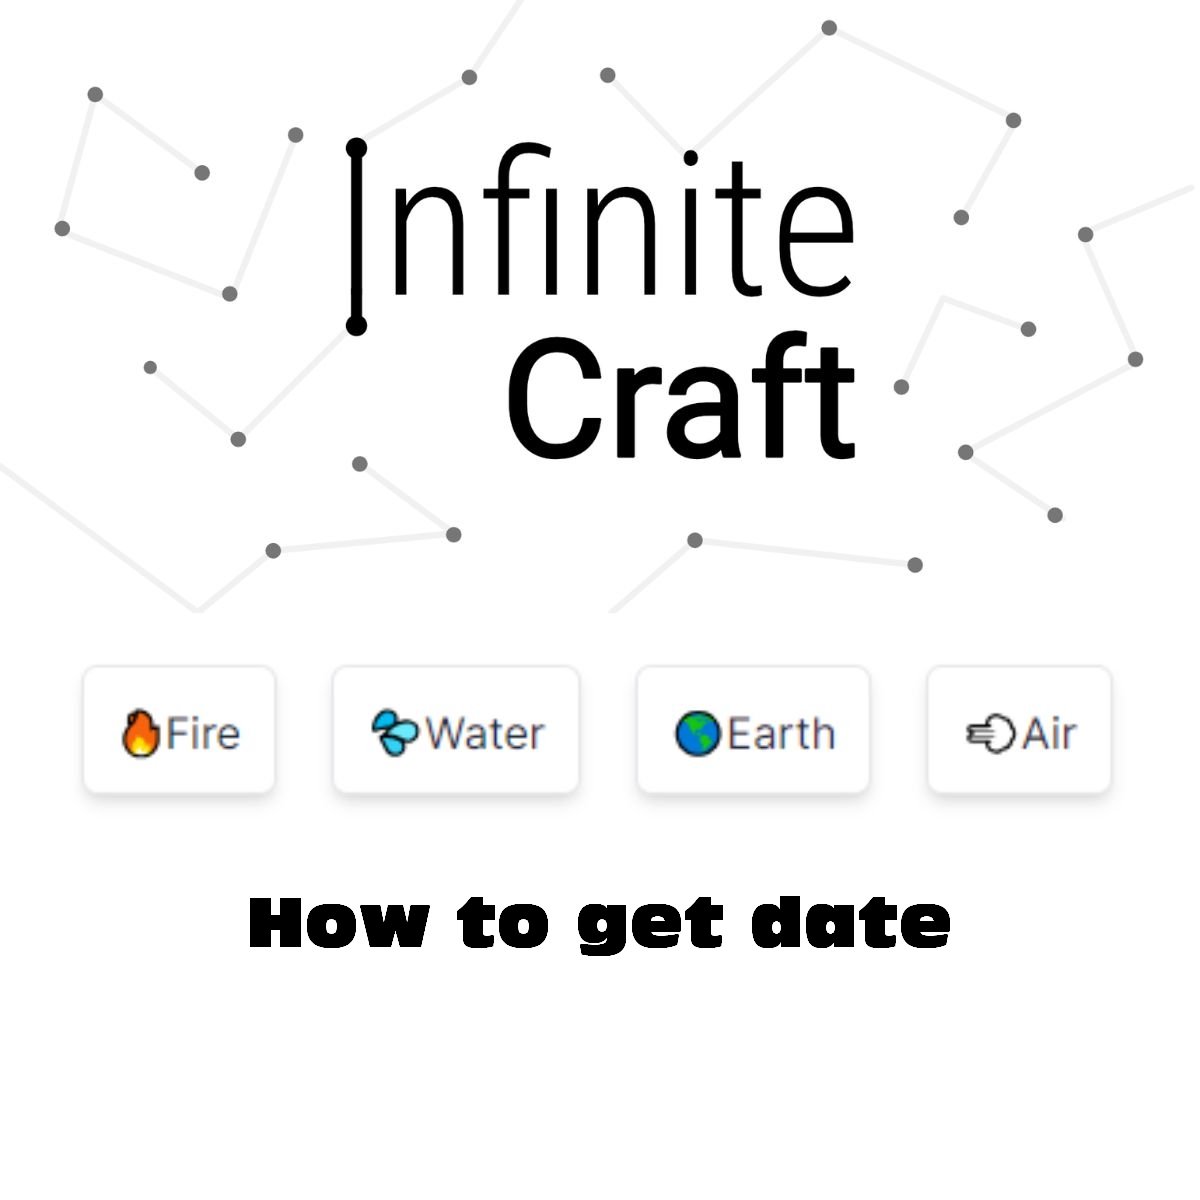 how to get date in infinite craft